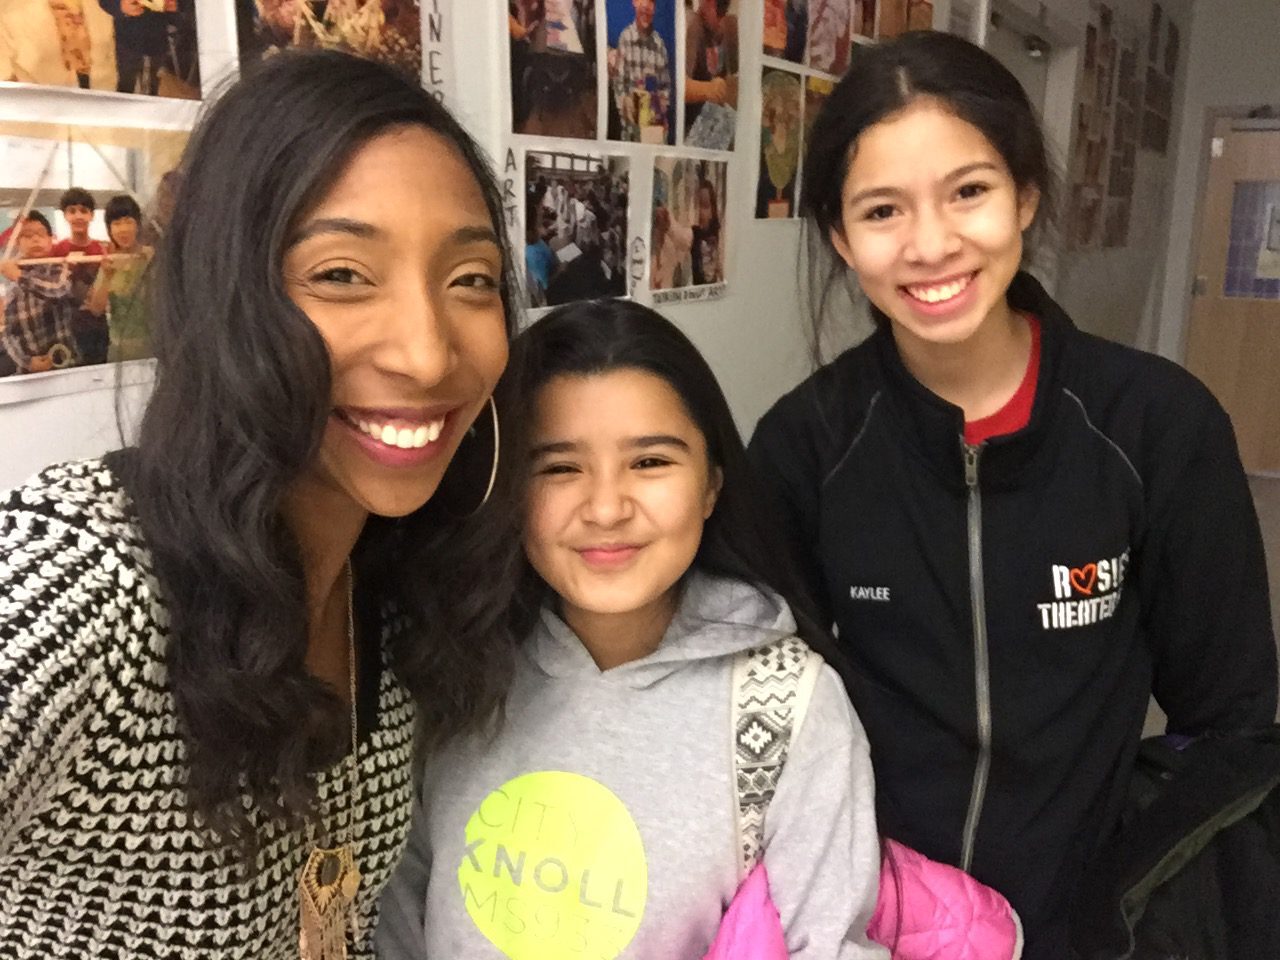 Three young girls posing for a photo in a hallway.